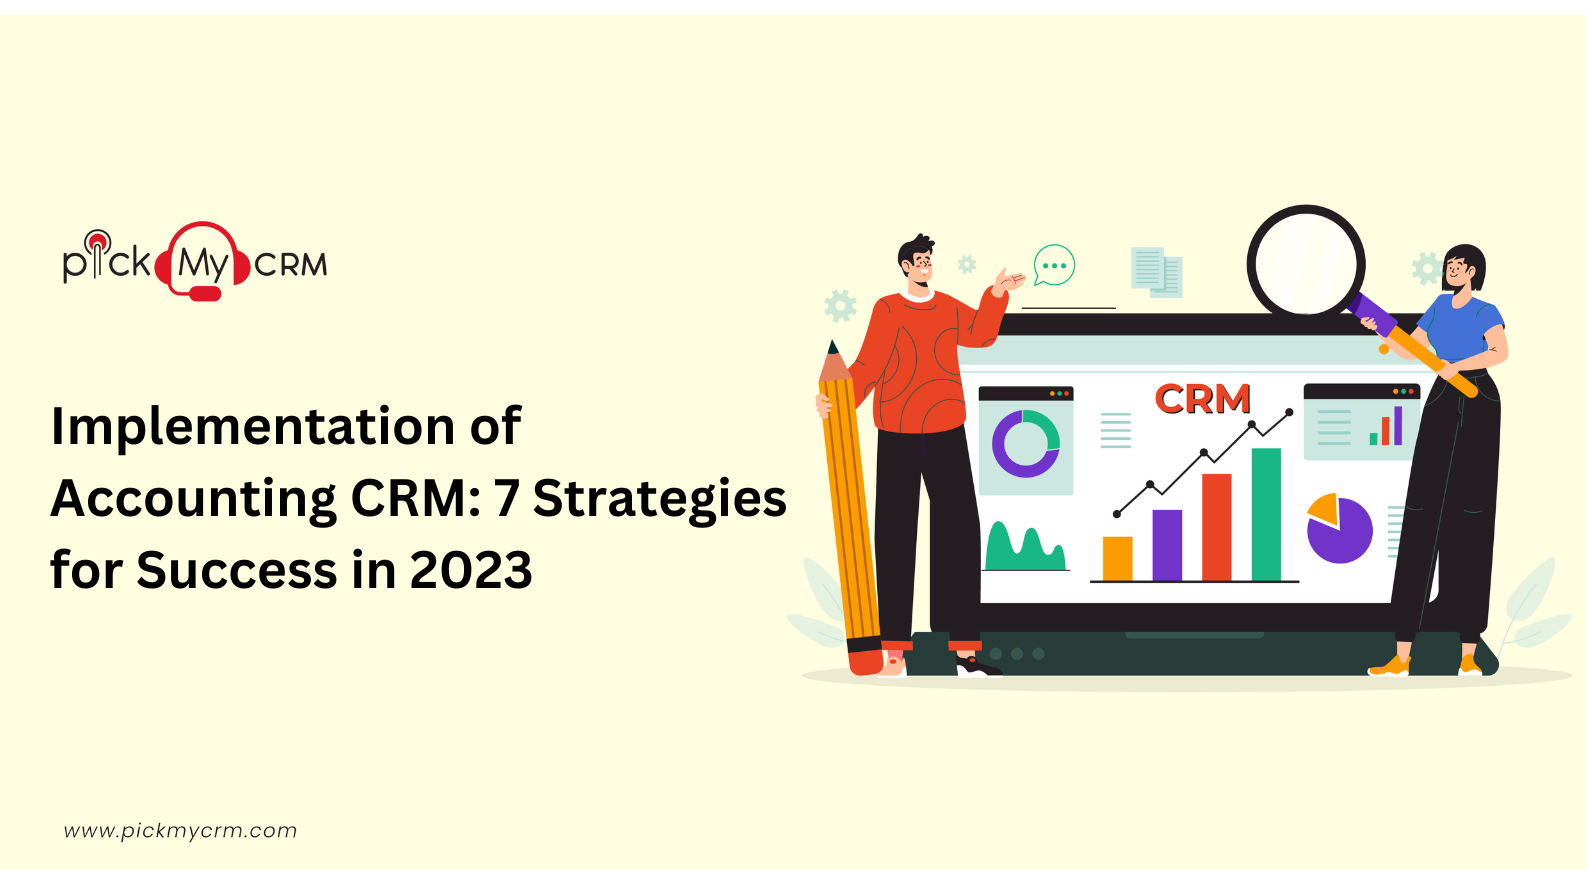 Implementation of Accounting CRM: 7 Strategies for Success in 2023